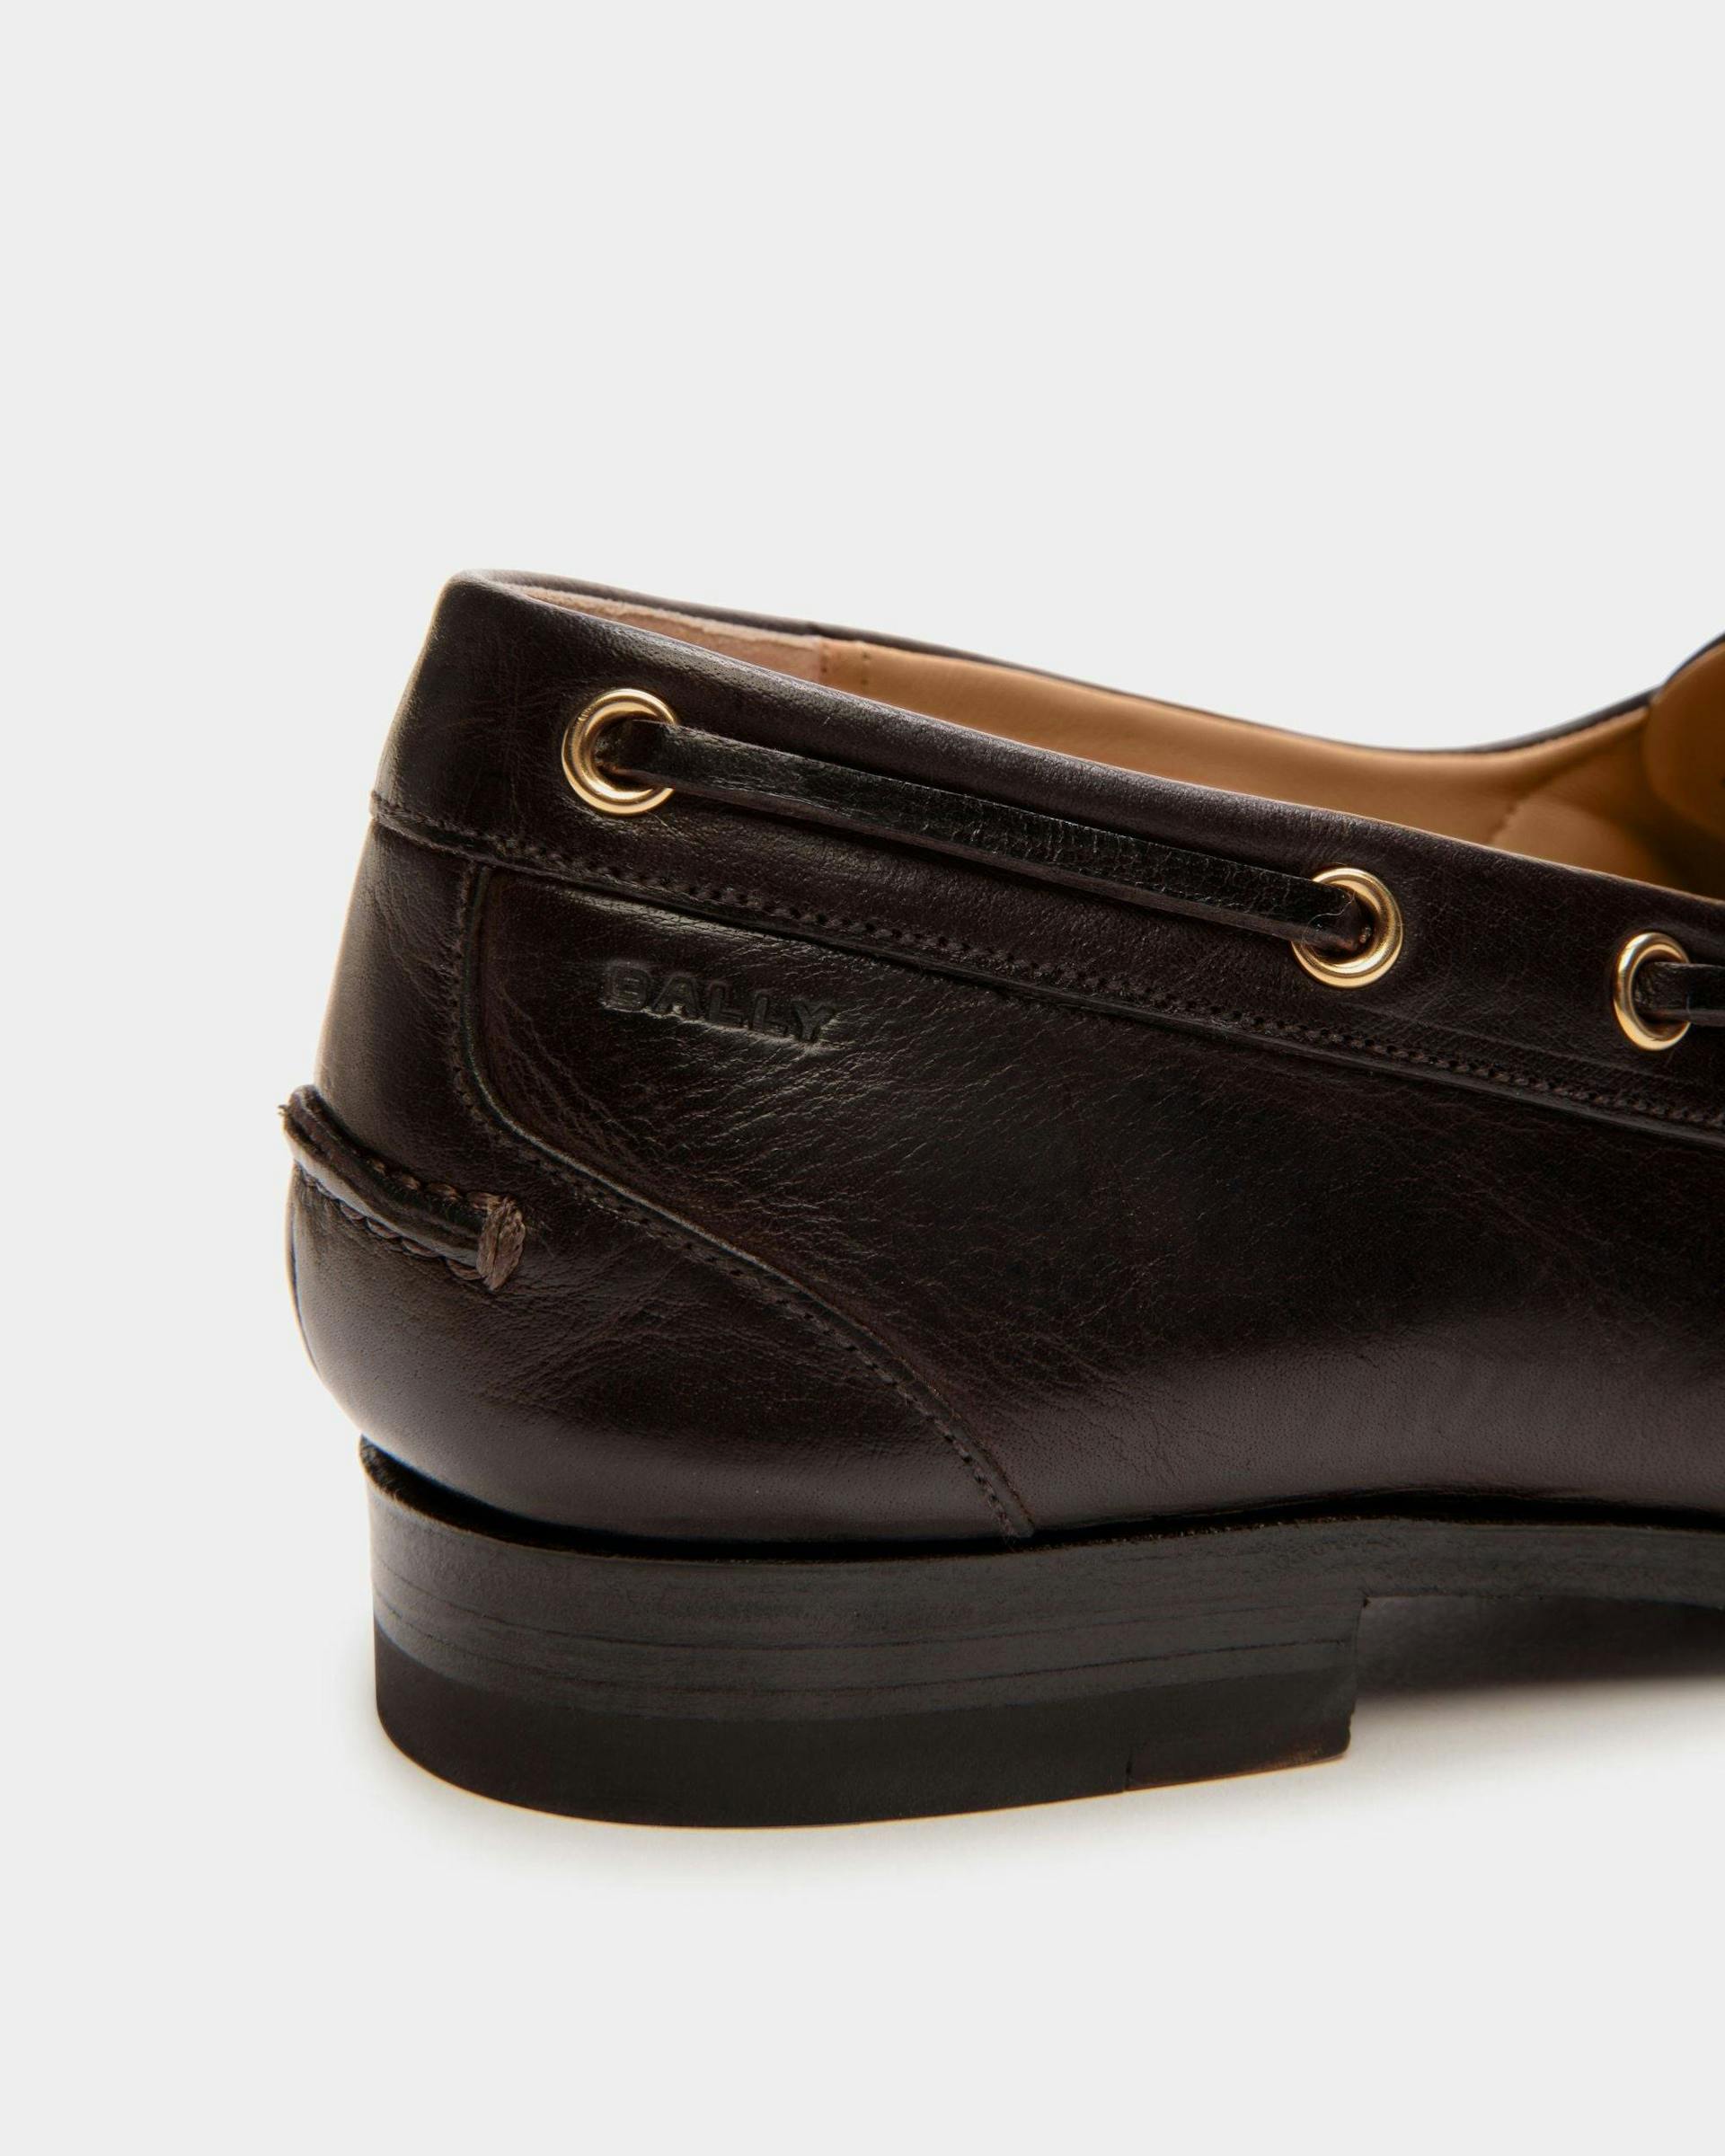 Women's Plume Moccasin in Dark Brown Leather | Bally | Still Life Detail